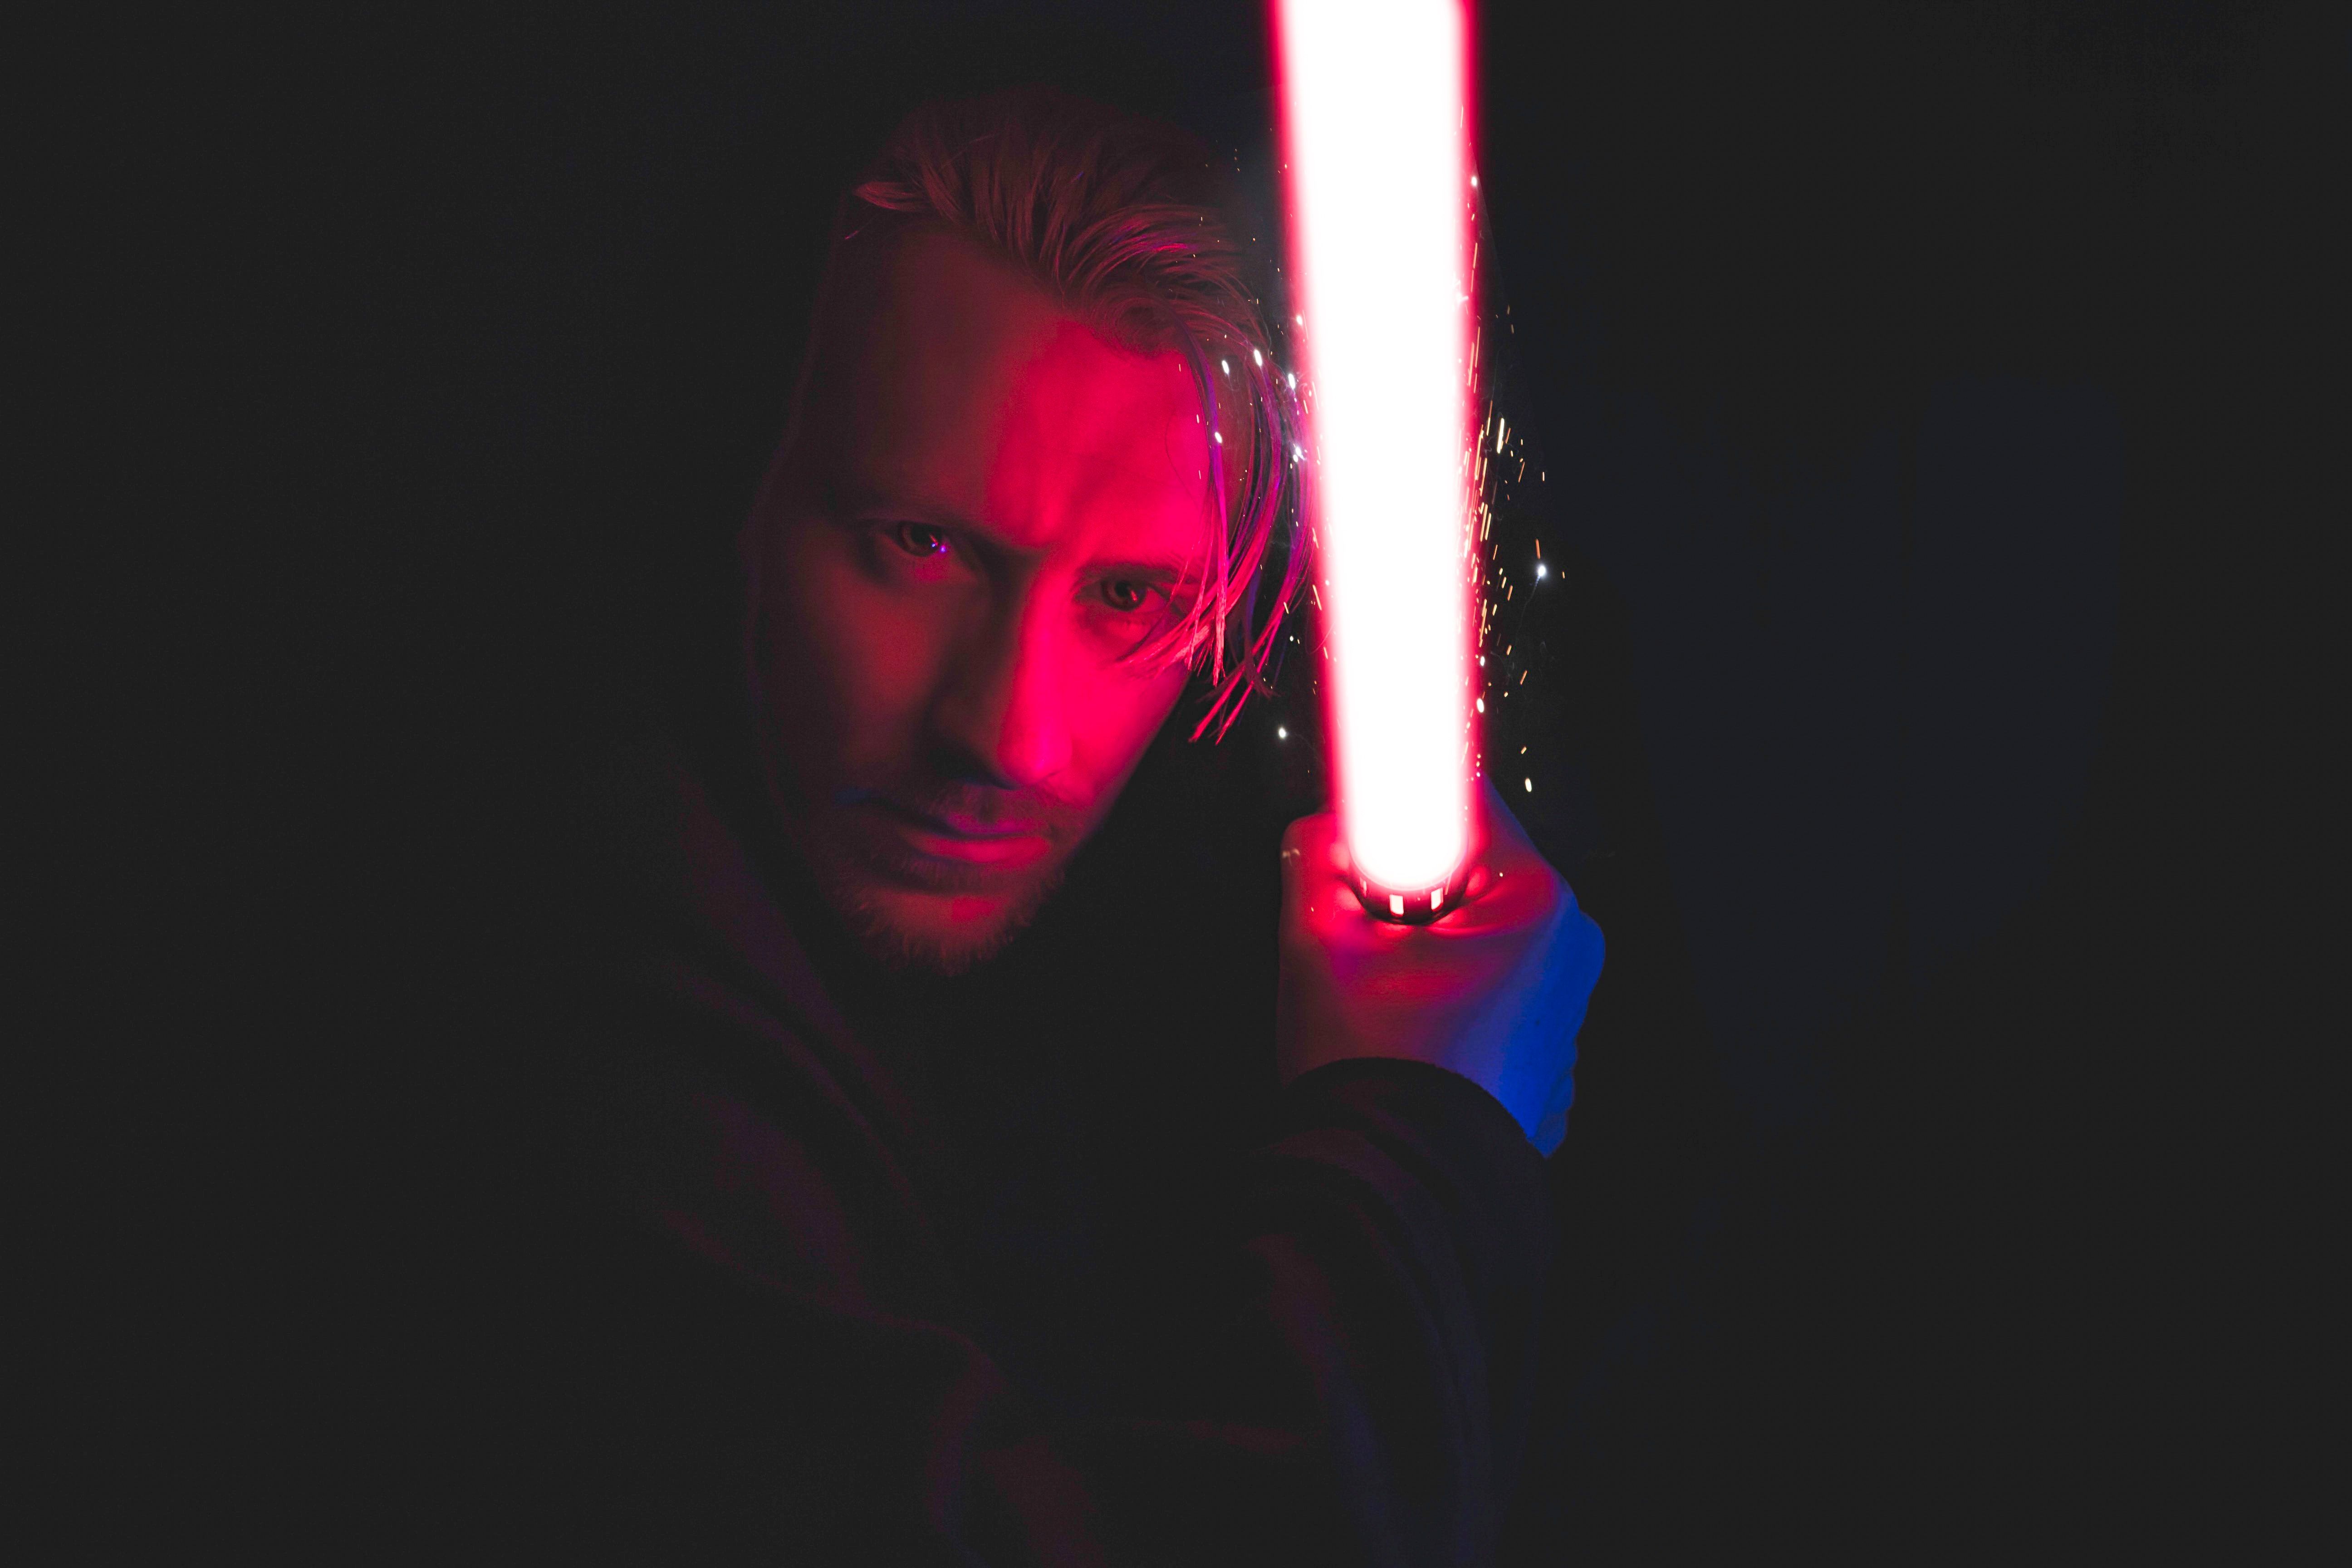 Photo of a person holding something that could resemble a lightsaber